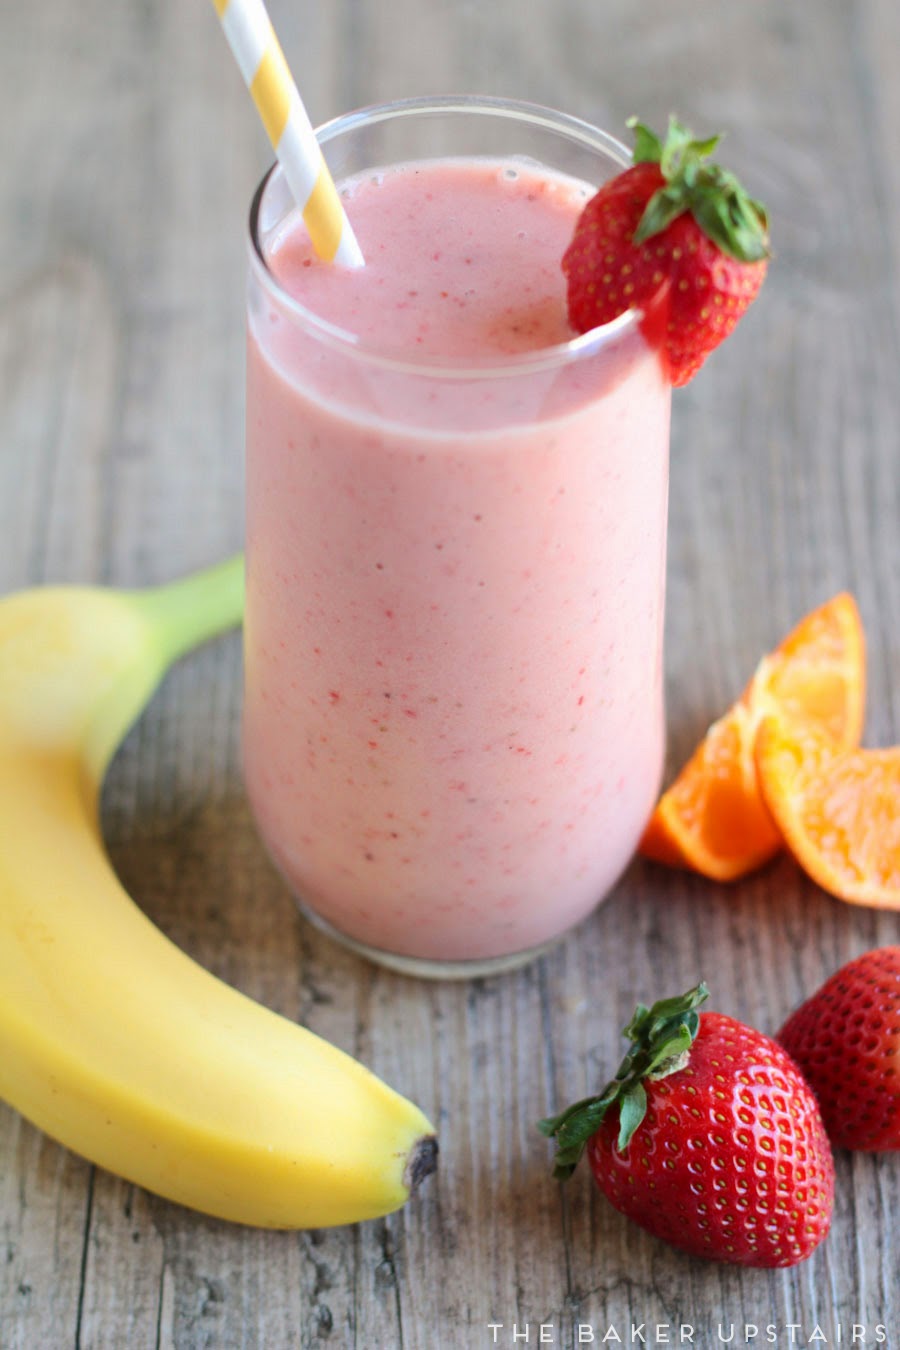 This strawberry sunrise breakfast smoothie is super delicious and full of fruit flavor. It takes only a few minutes to make and tastes great!